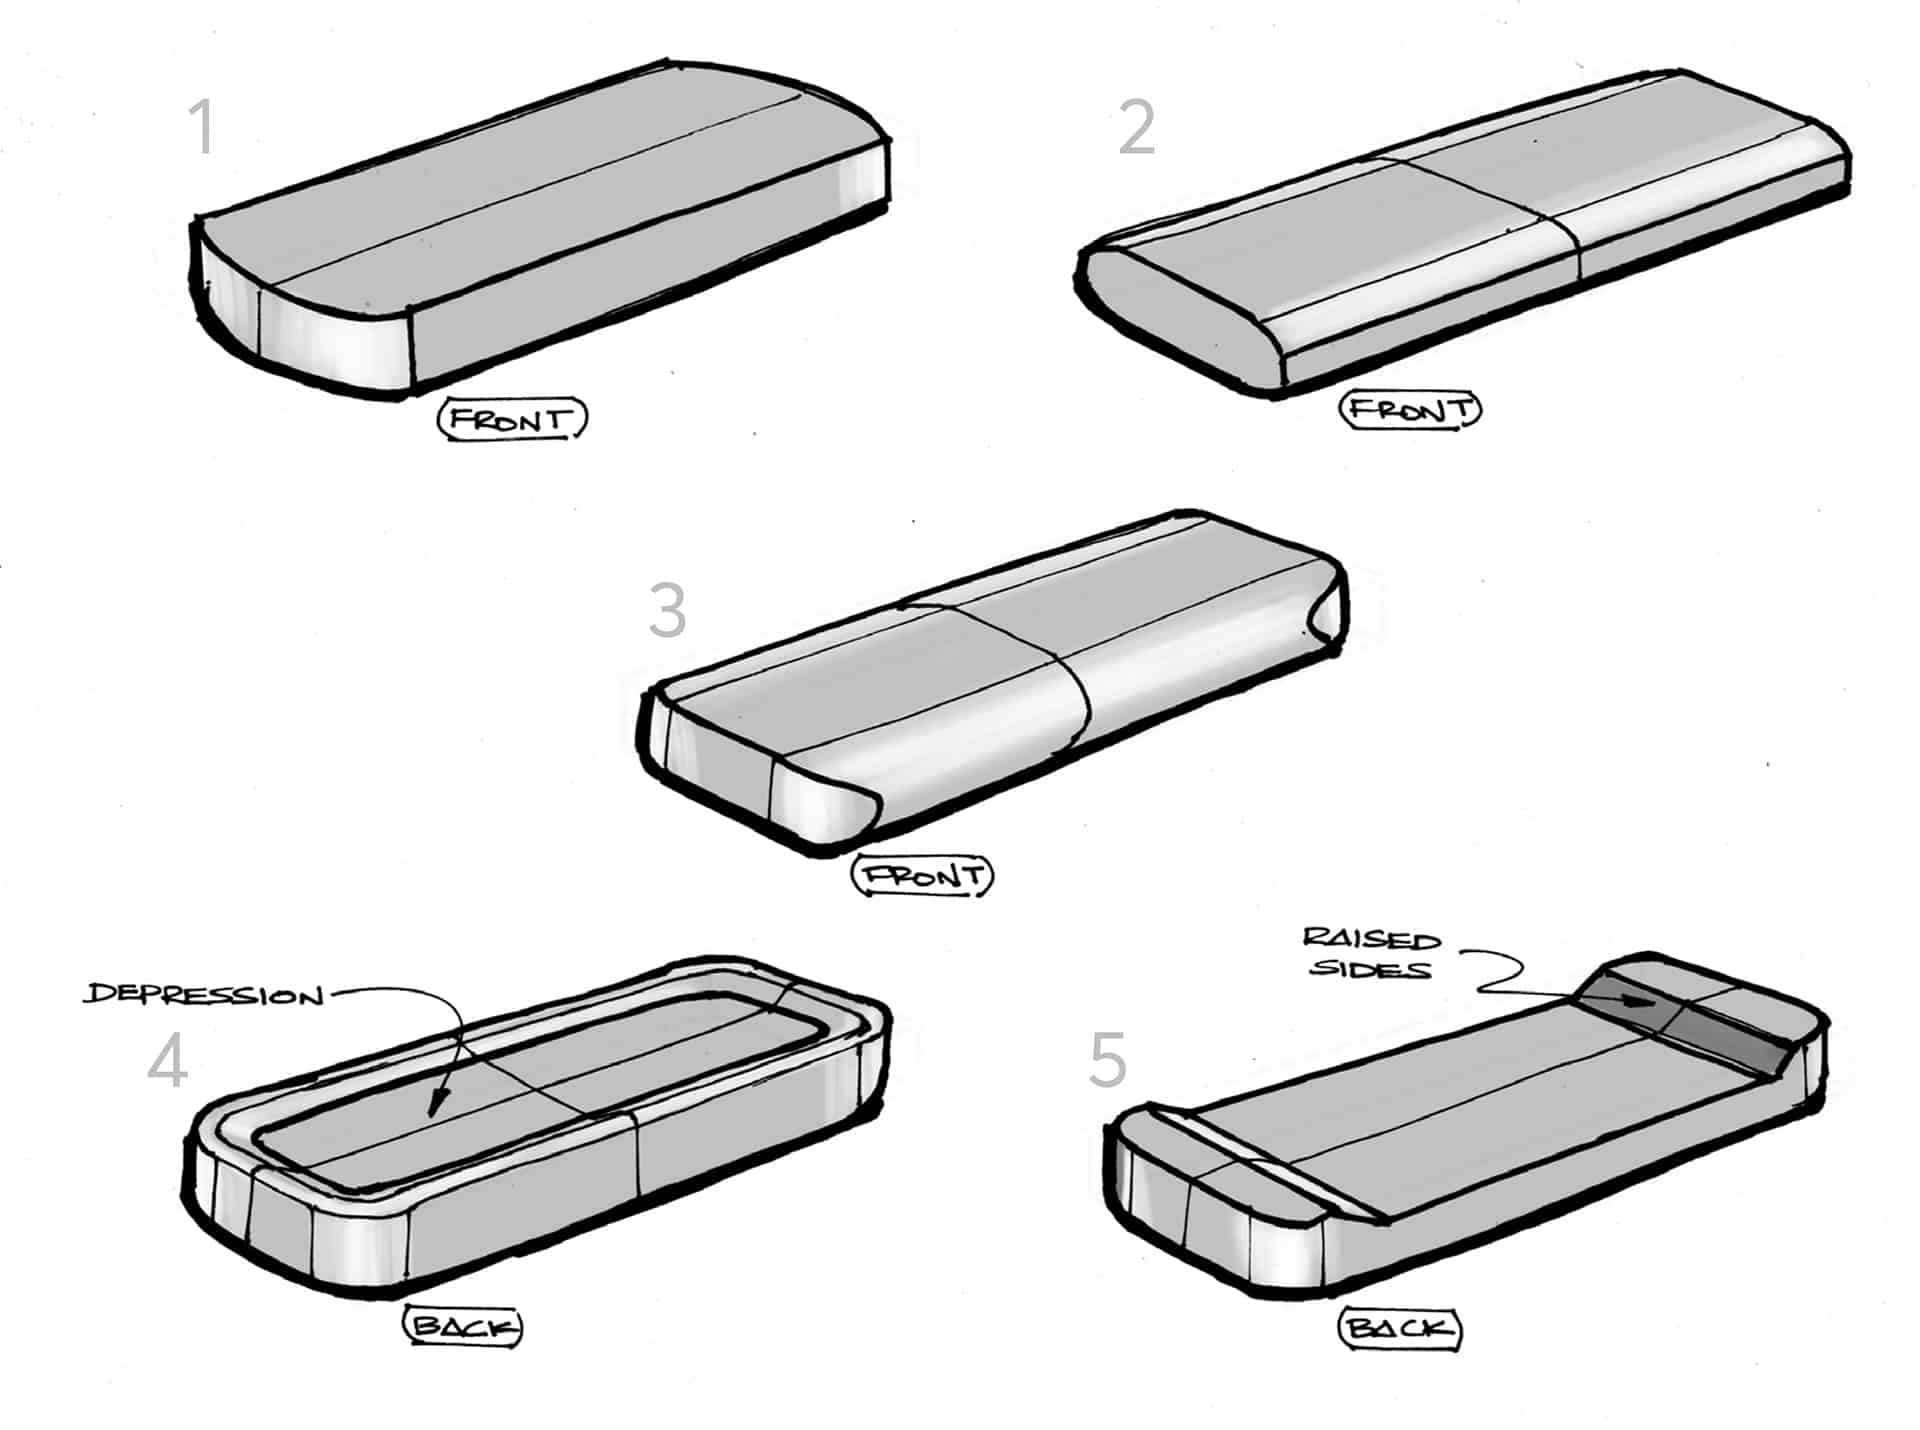 Industrial design sketches of the Modulus remote